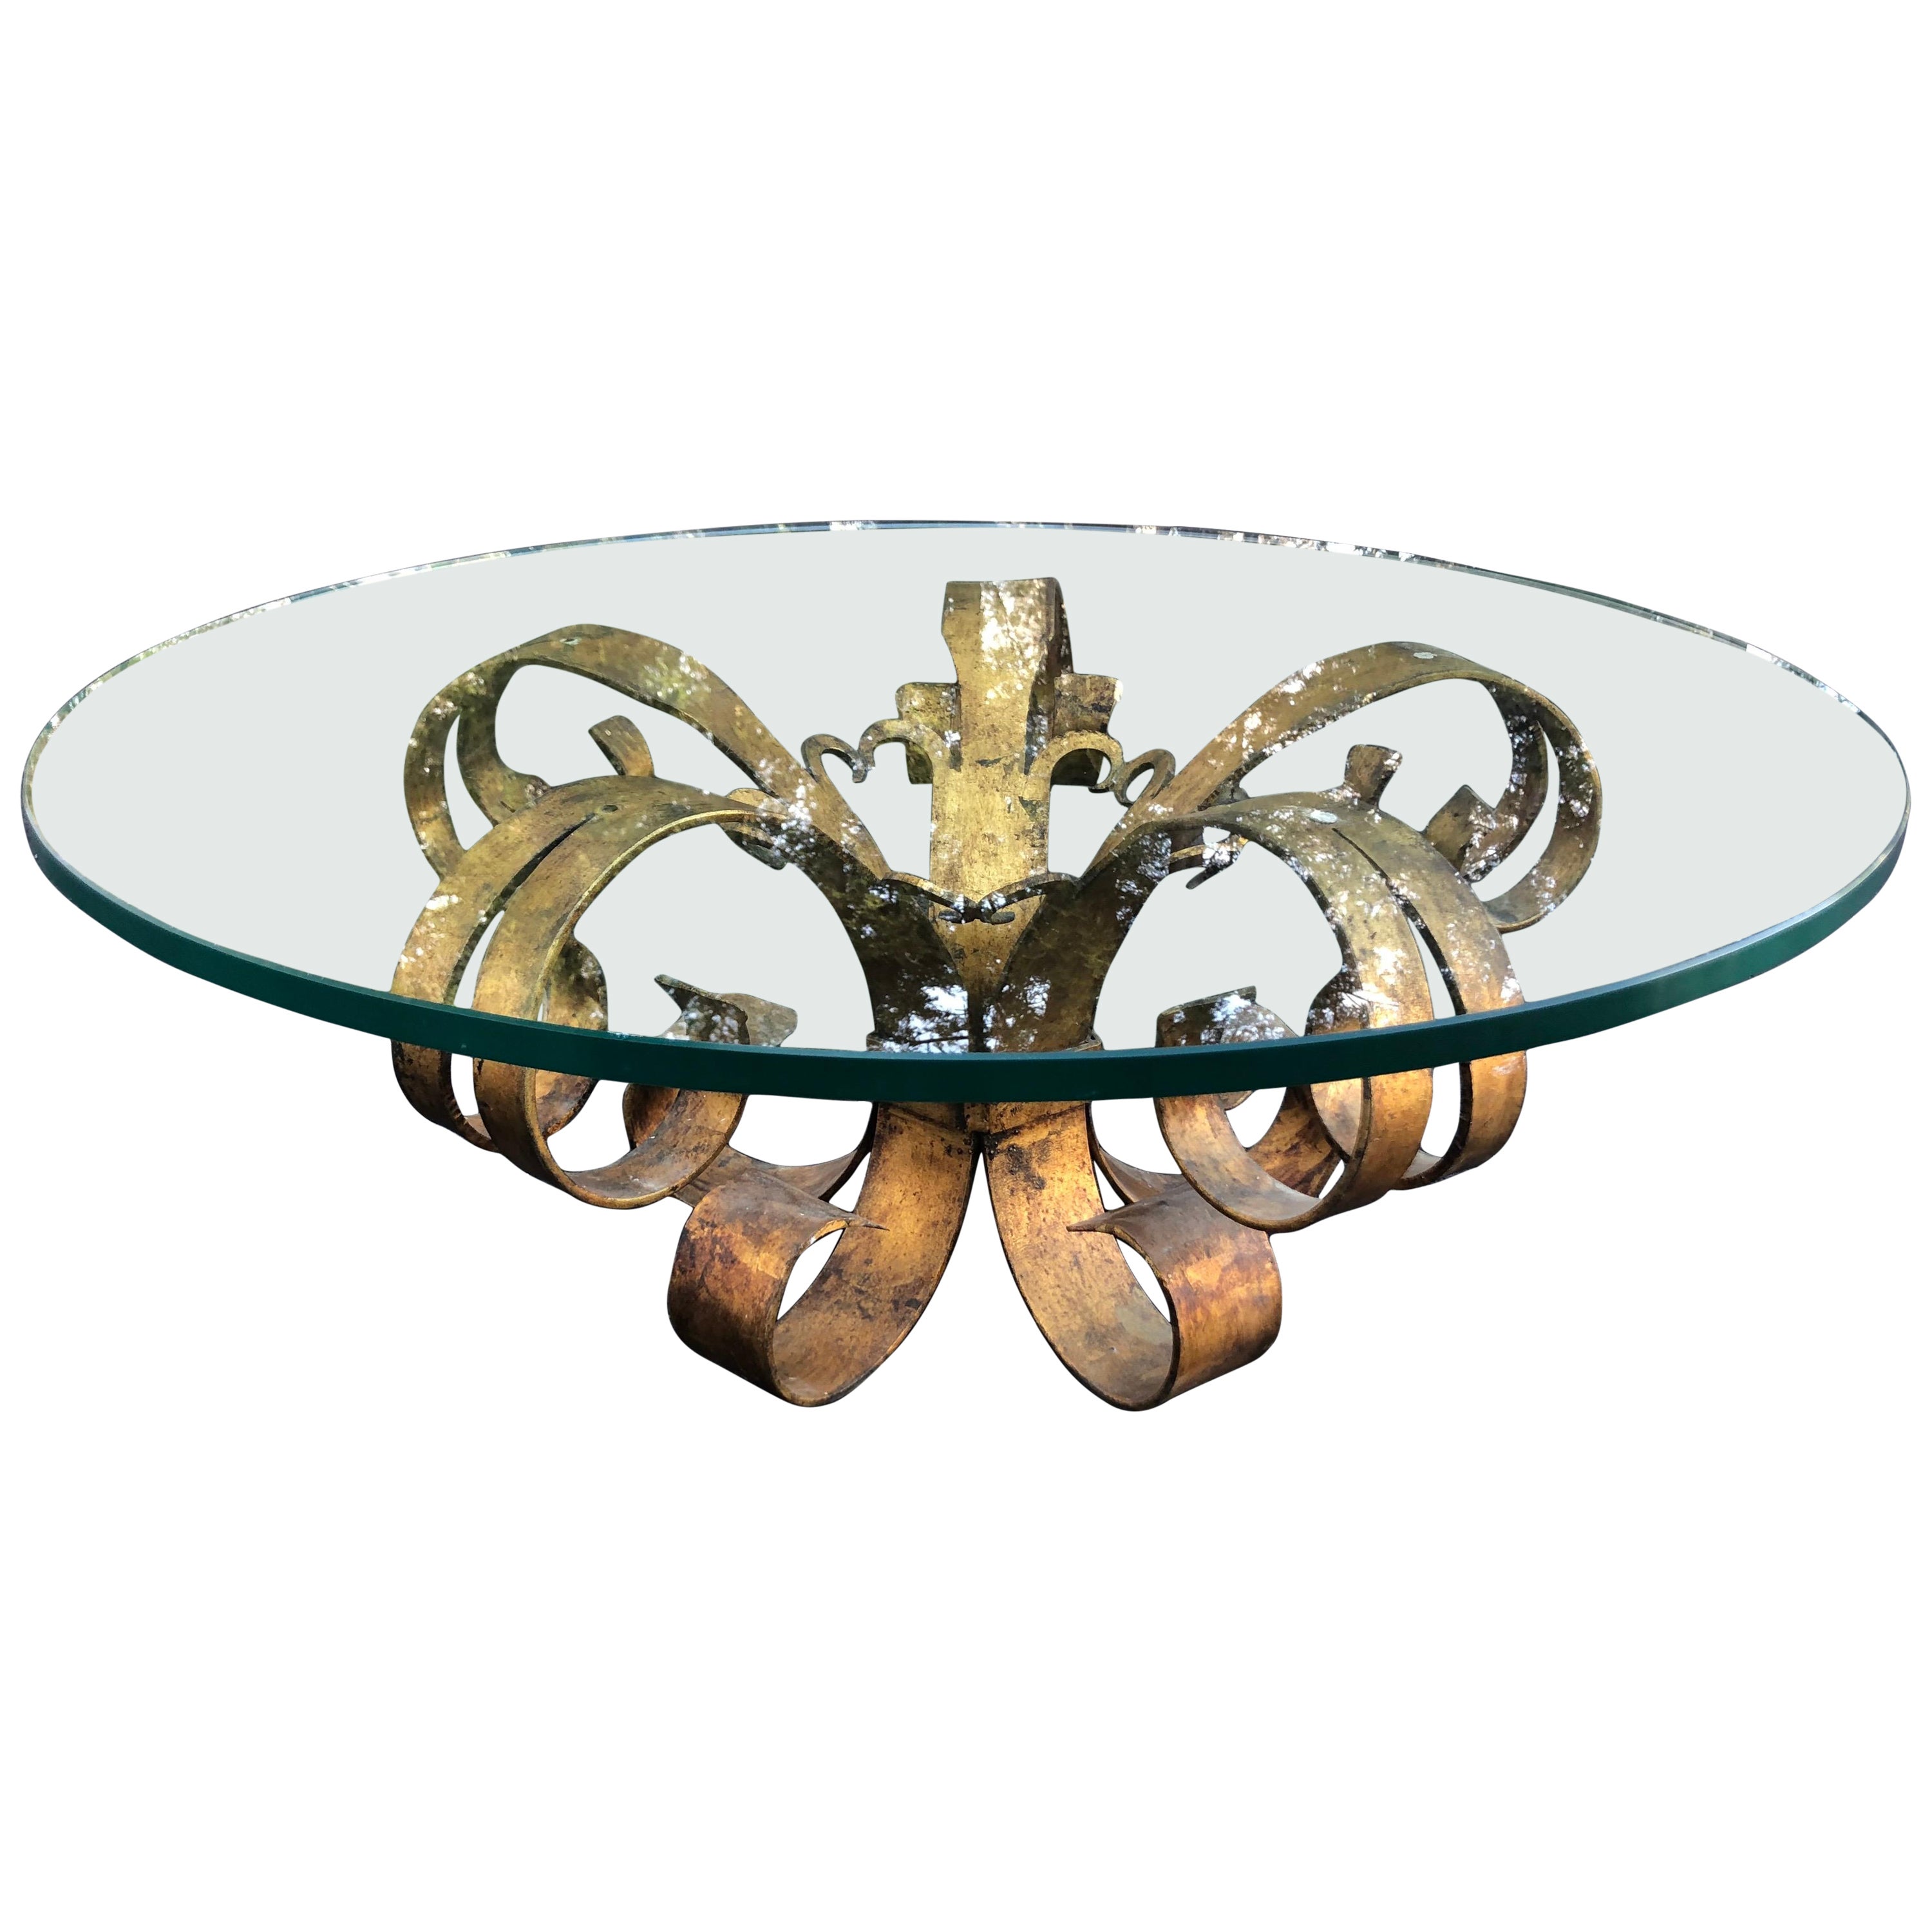 Gilt Iron Coffee Lotus Table with Round Glass Top